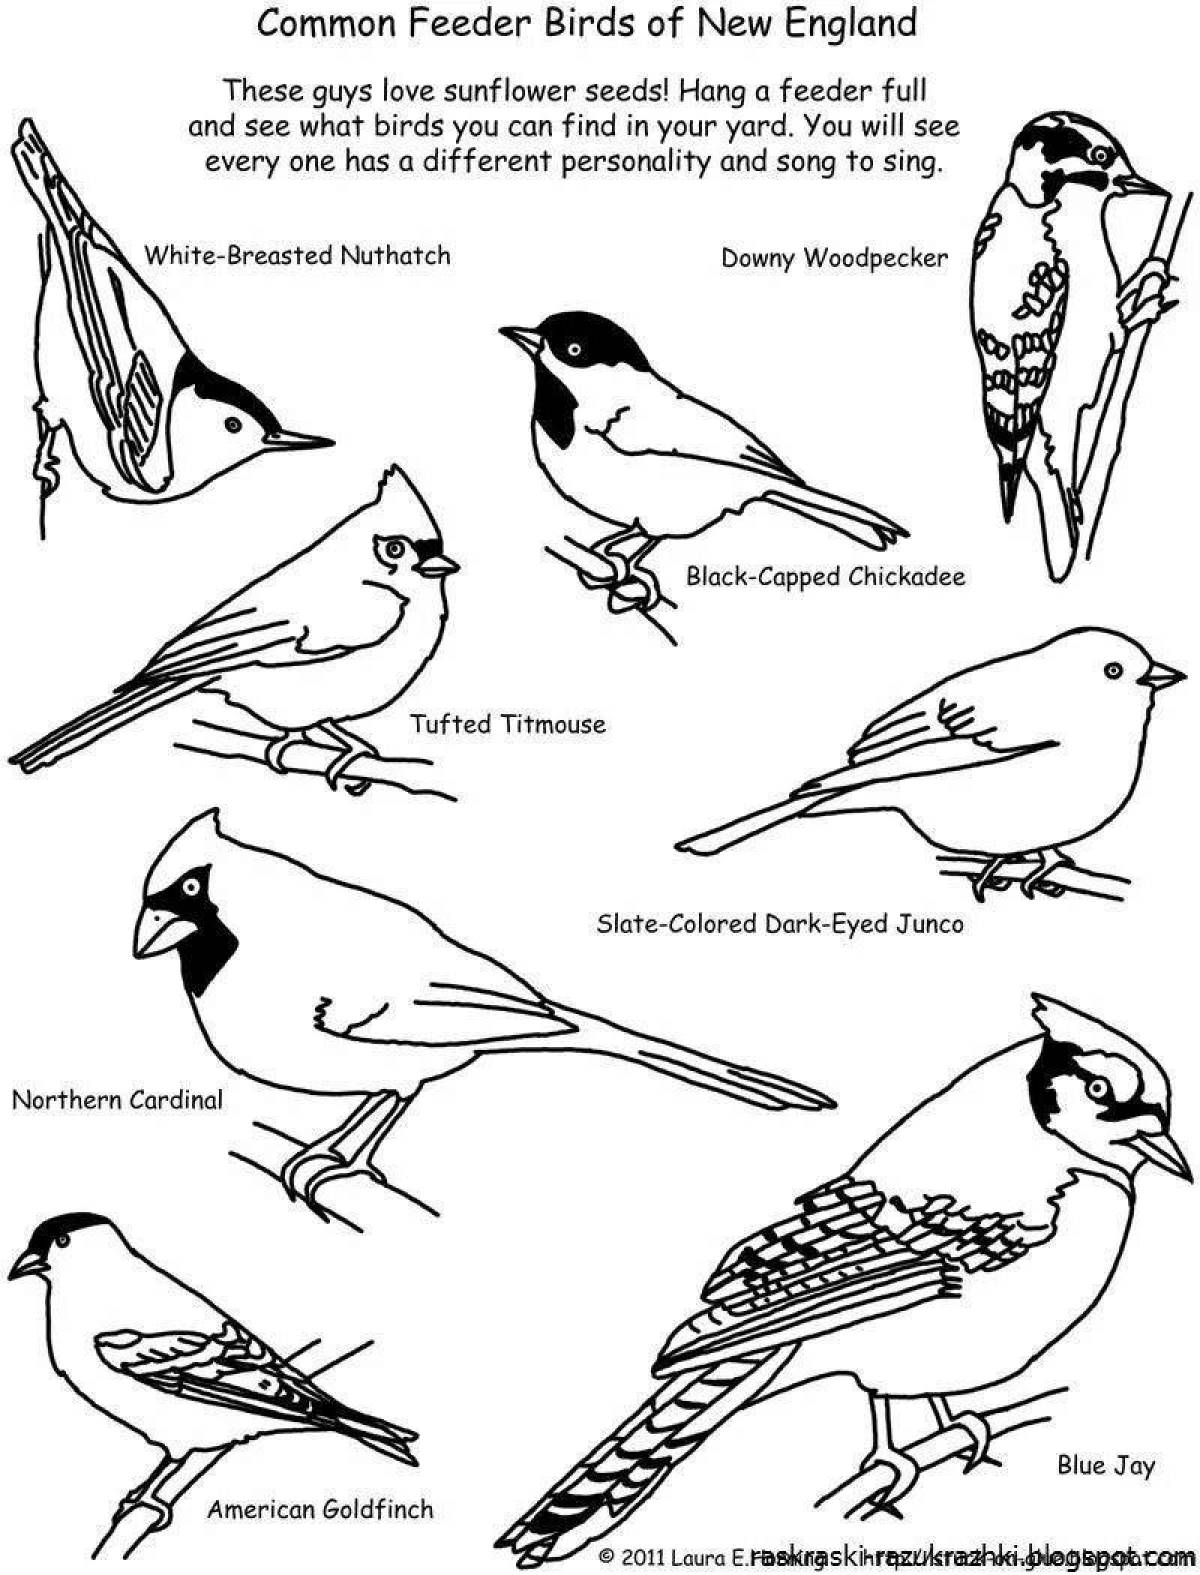 Exquisite coloring of wintering birds with descriptions